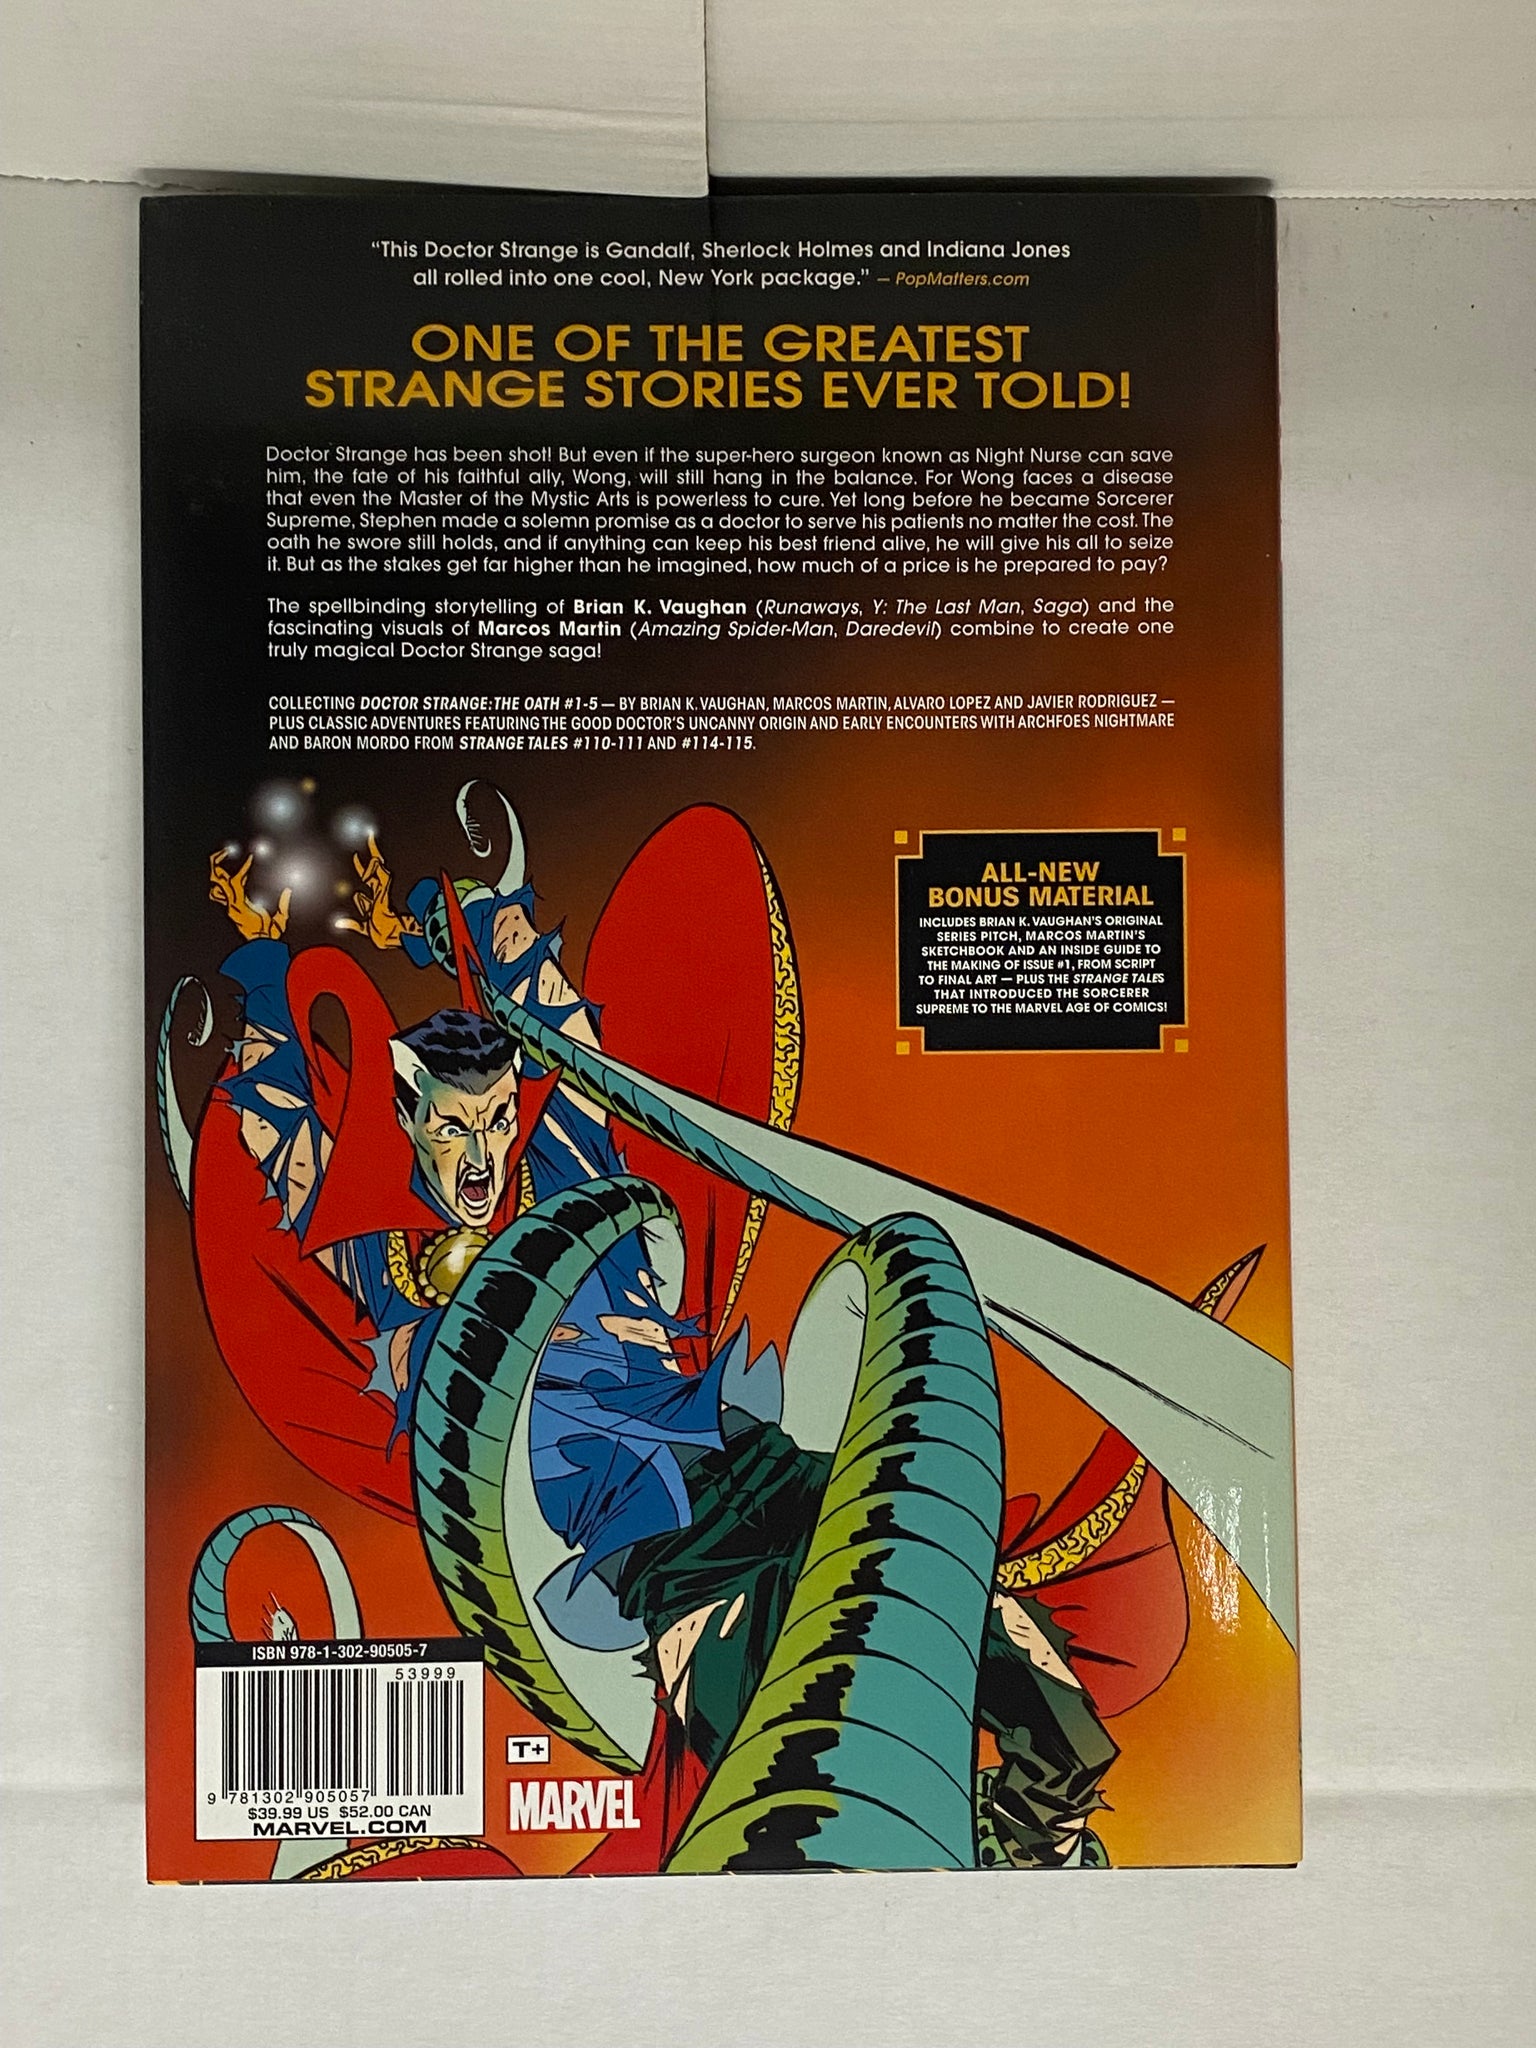 DOCTOR STRANGE: THE OATH LCSD EDITION HARDCOVER - NEW OPENED STOCK